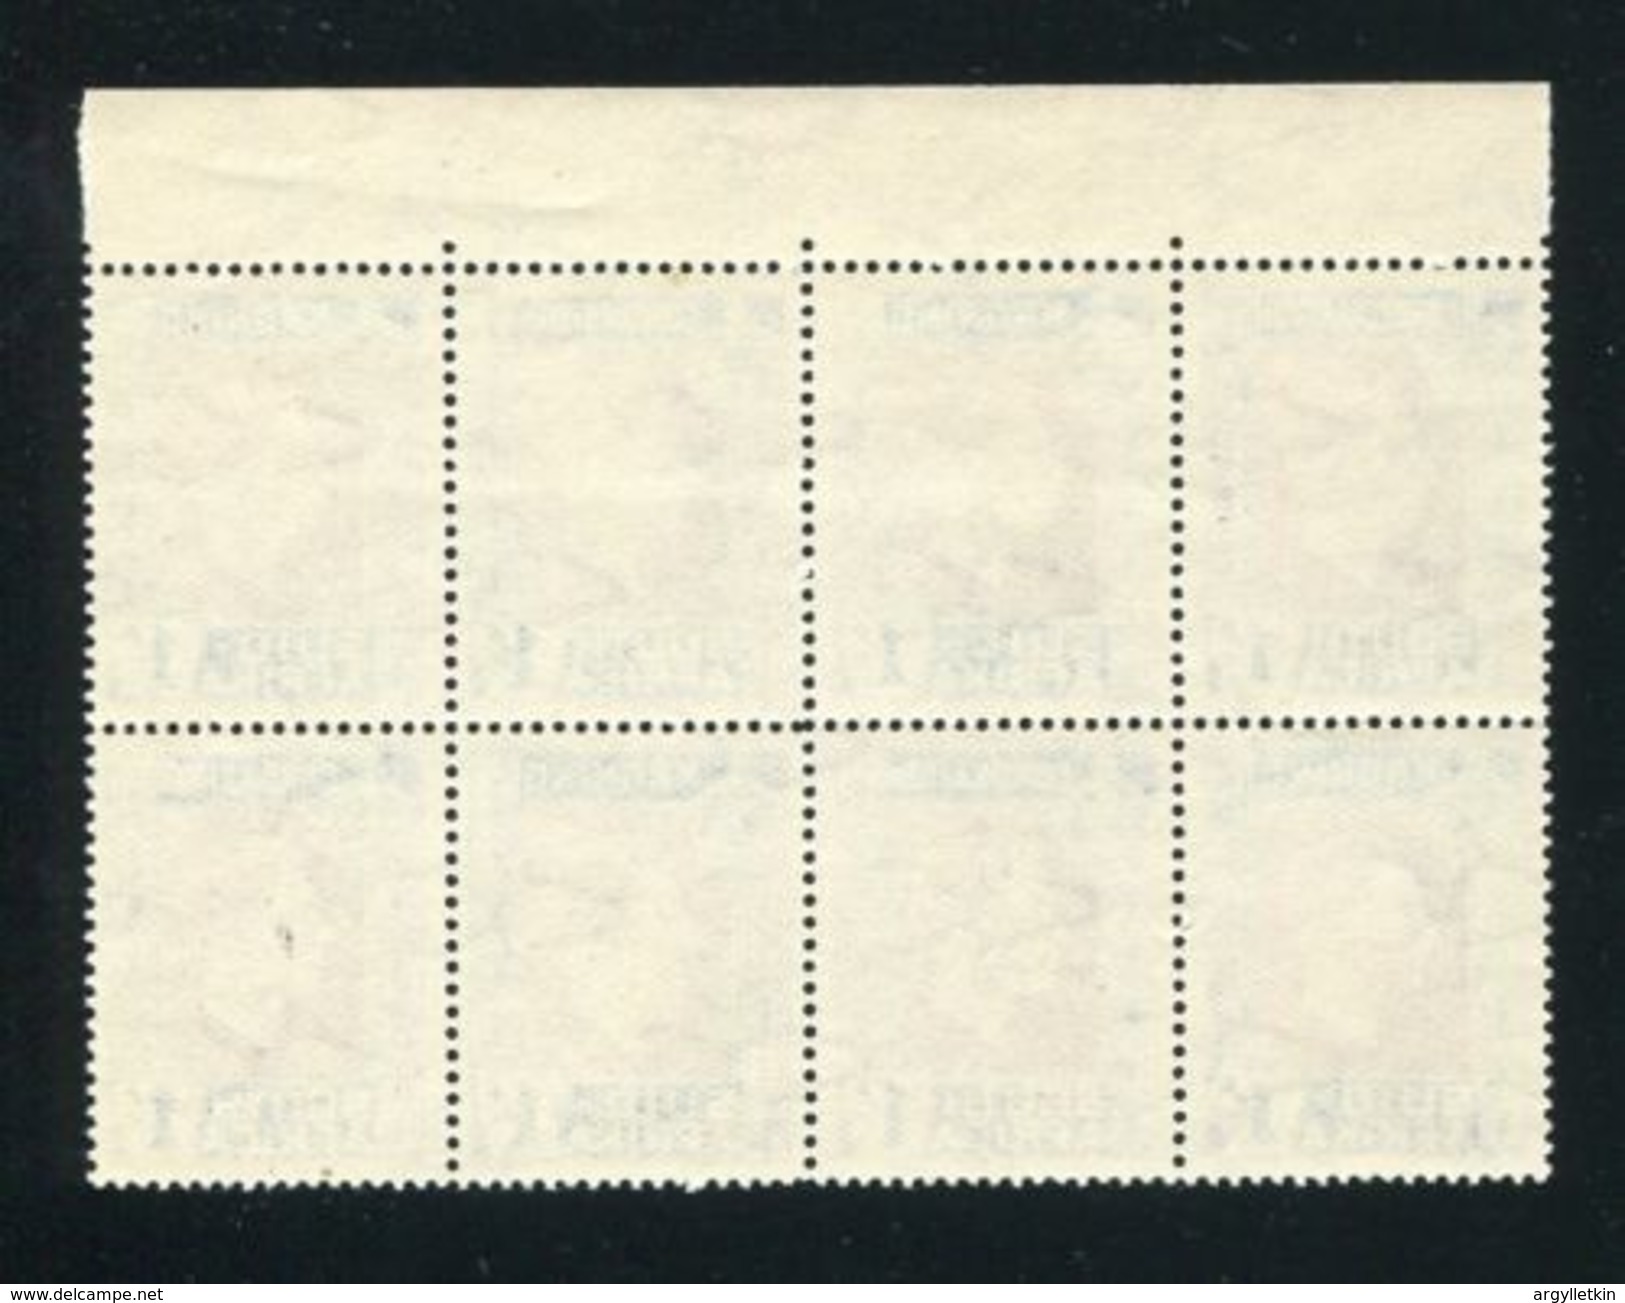 SOUTH AFRICA GEORGE SIXTH CORONATION BLOCK VARIETY 1937 - Unclassified